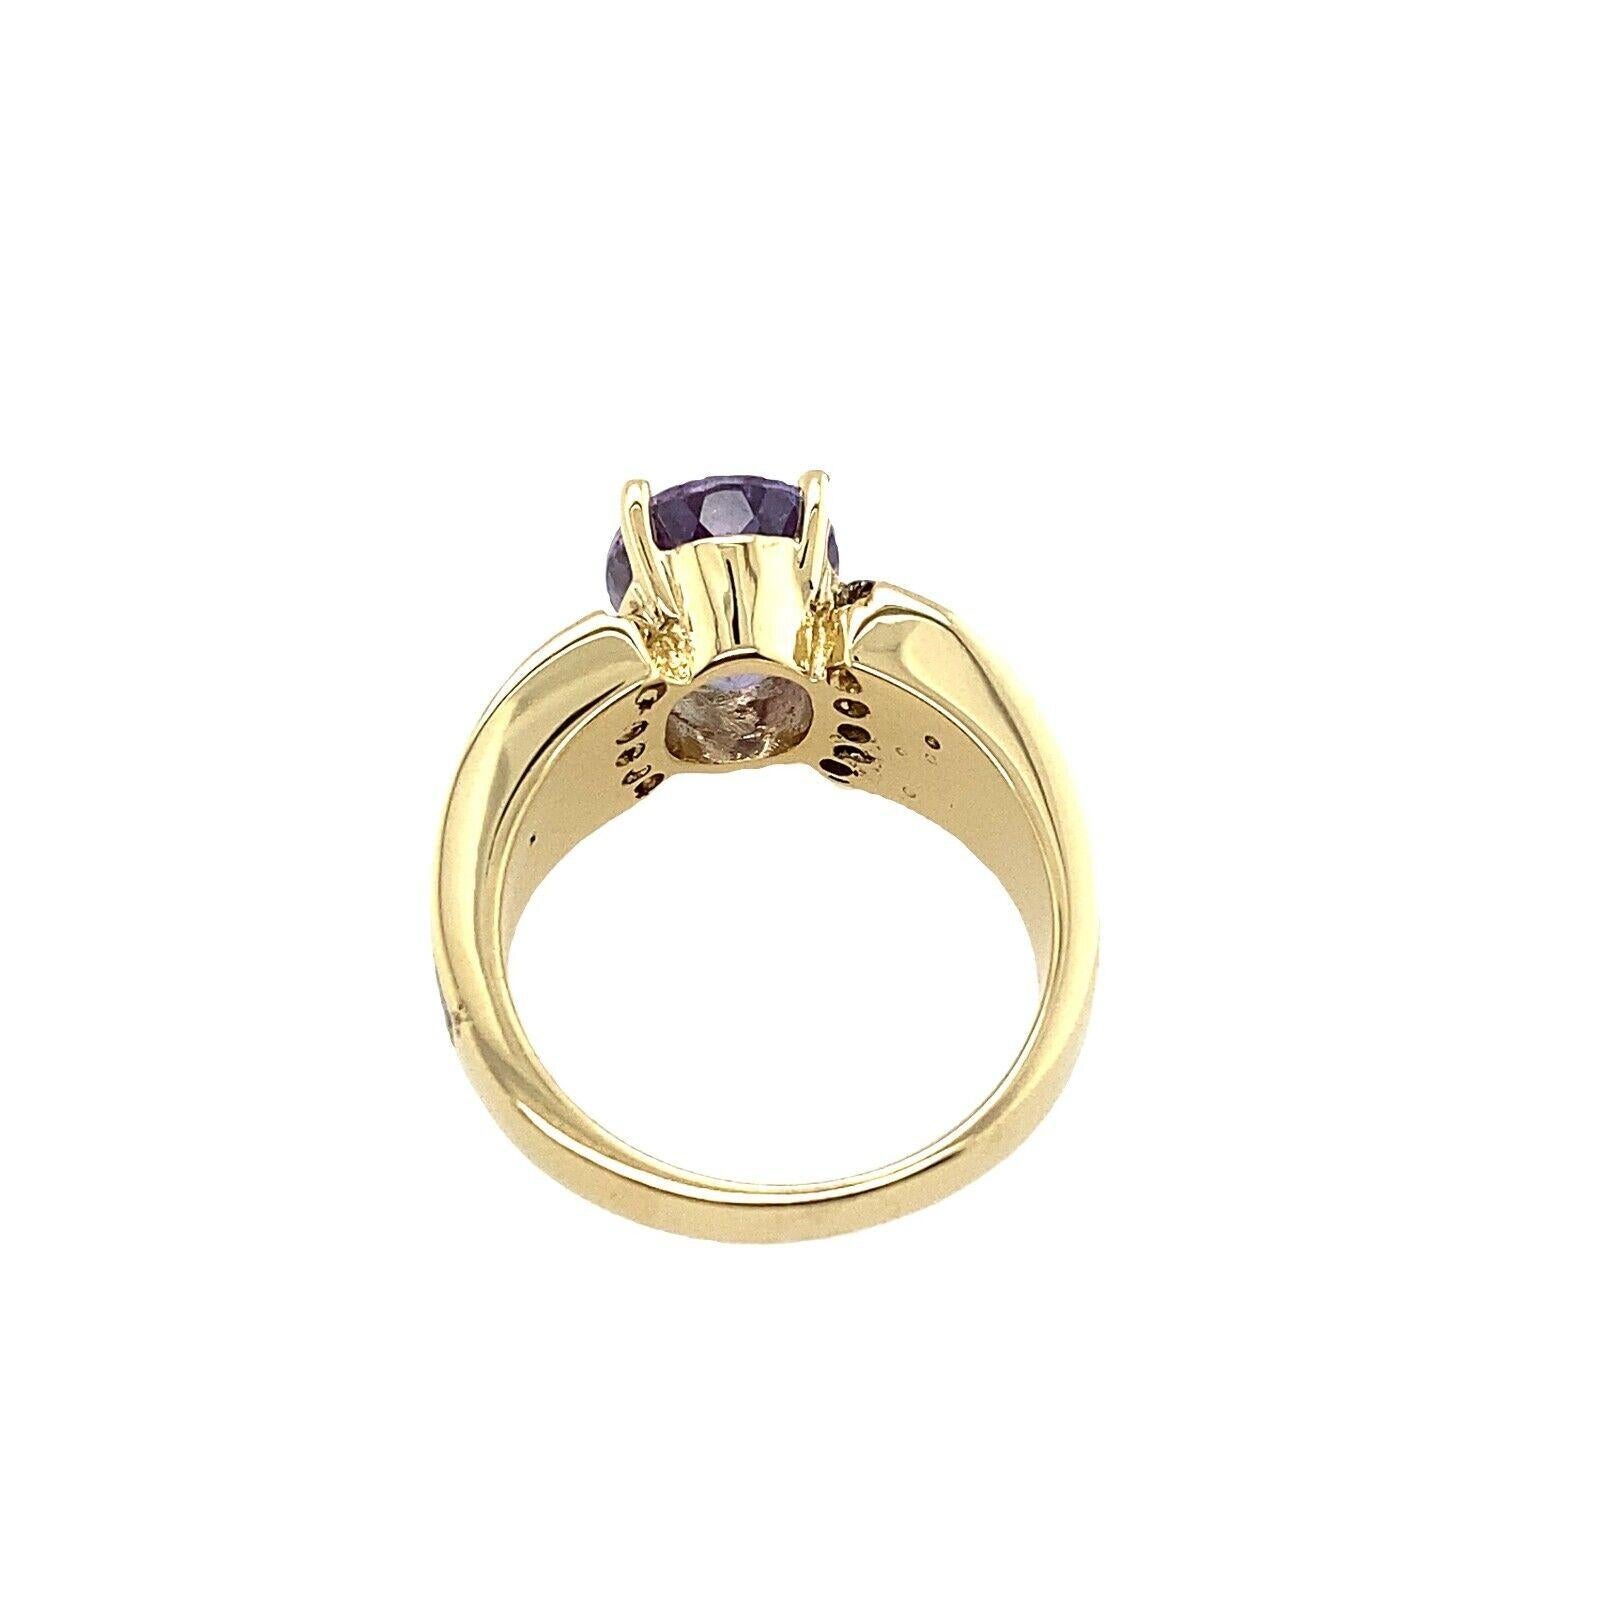 This elegant piece features a stunning 3.0ct Tanzanite gemstone and 4 round Diamonds set on shoulders on 14ct Yellow Gold. These stones are set in a delicate and beautiful arrangement that will add a touch of elegance.

Additional Information:
Total